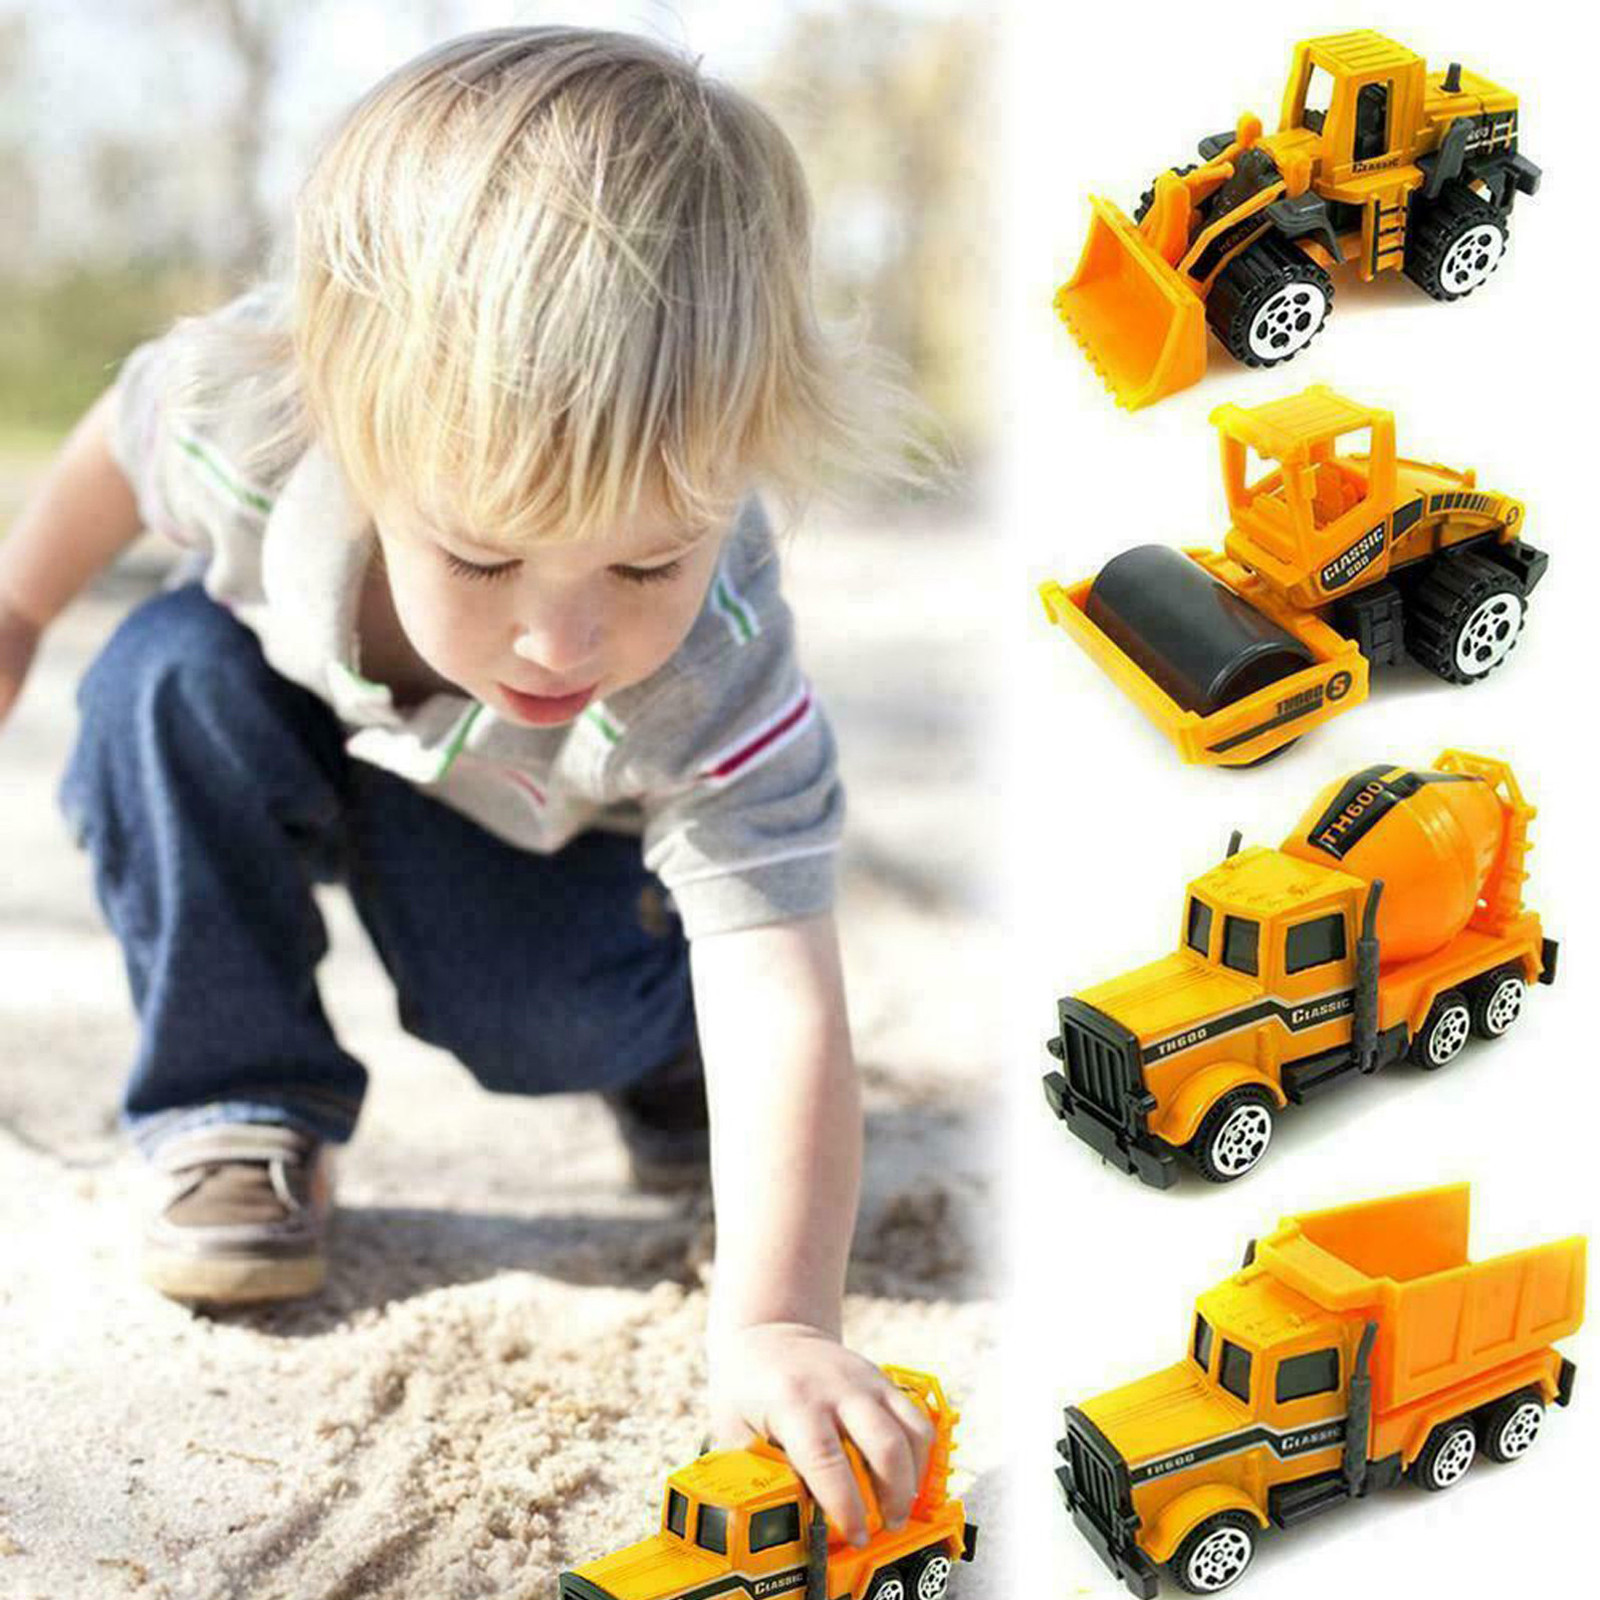 VANLOFE Car Toys For Boys Aged 2 3 4+ Gift 6 PC Diecast Mini Alloy Inertial Engineering Vehicle Dump Truck Educational Toys - image 1 of 8